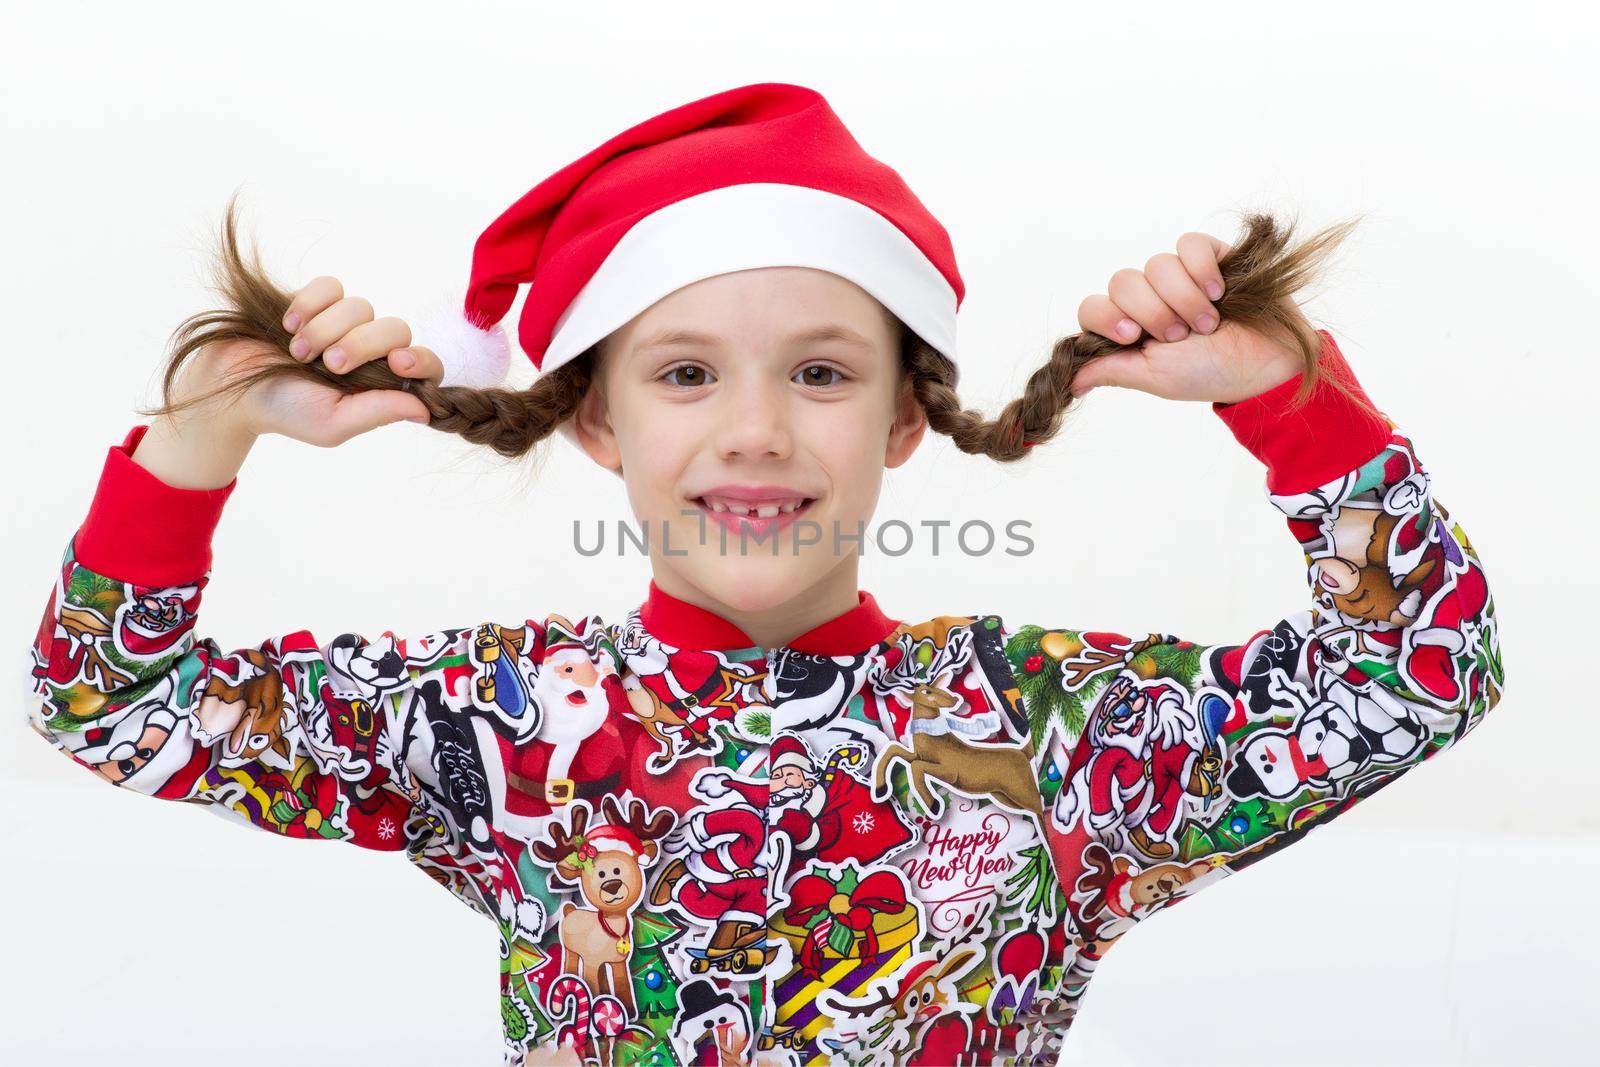 Happy young girl with pigtails and Santa cap. Close up portrait of cute smiling girl in bright colorful clothes posing against isolated white background. New Year and Merry Xmas concept